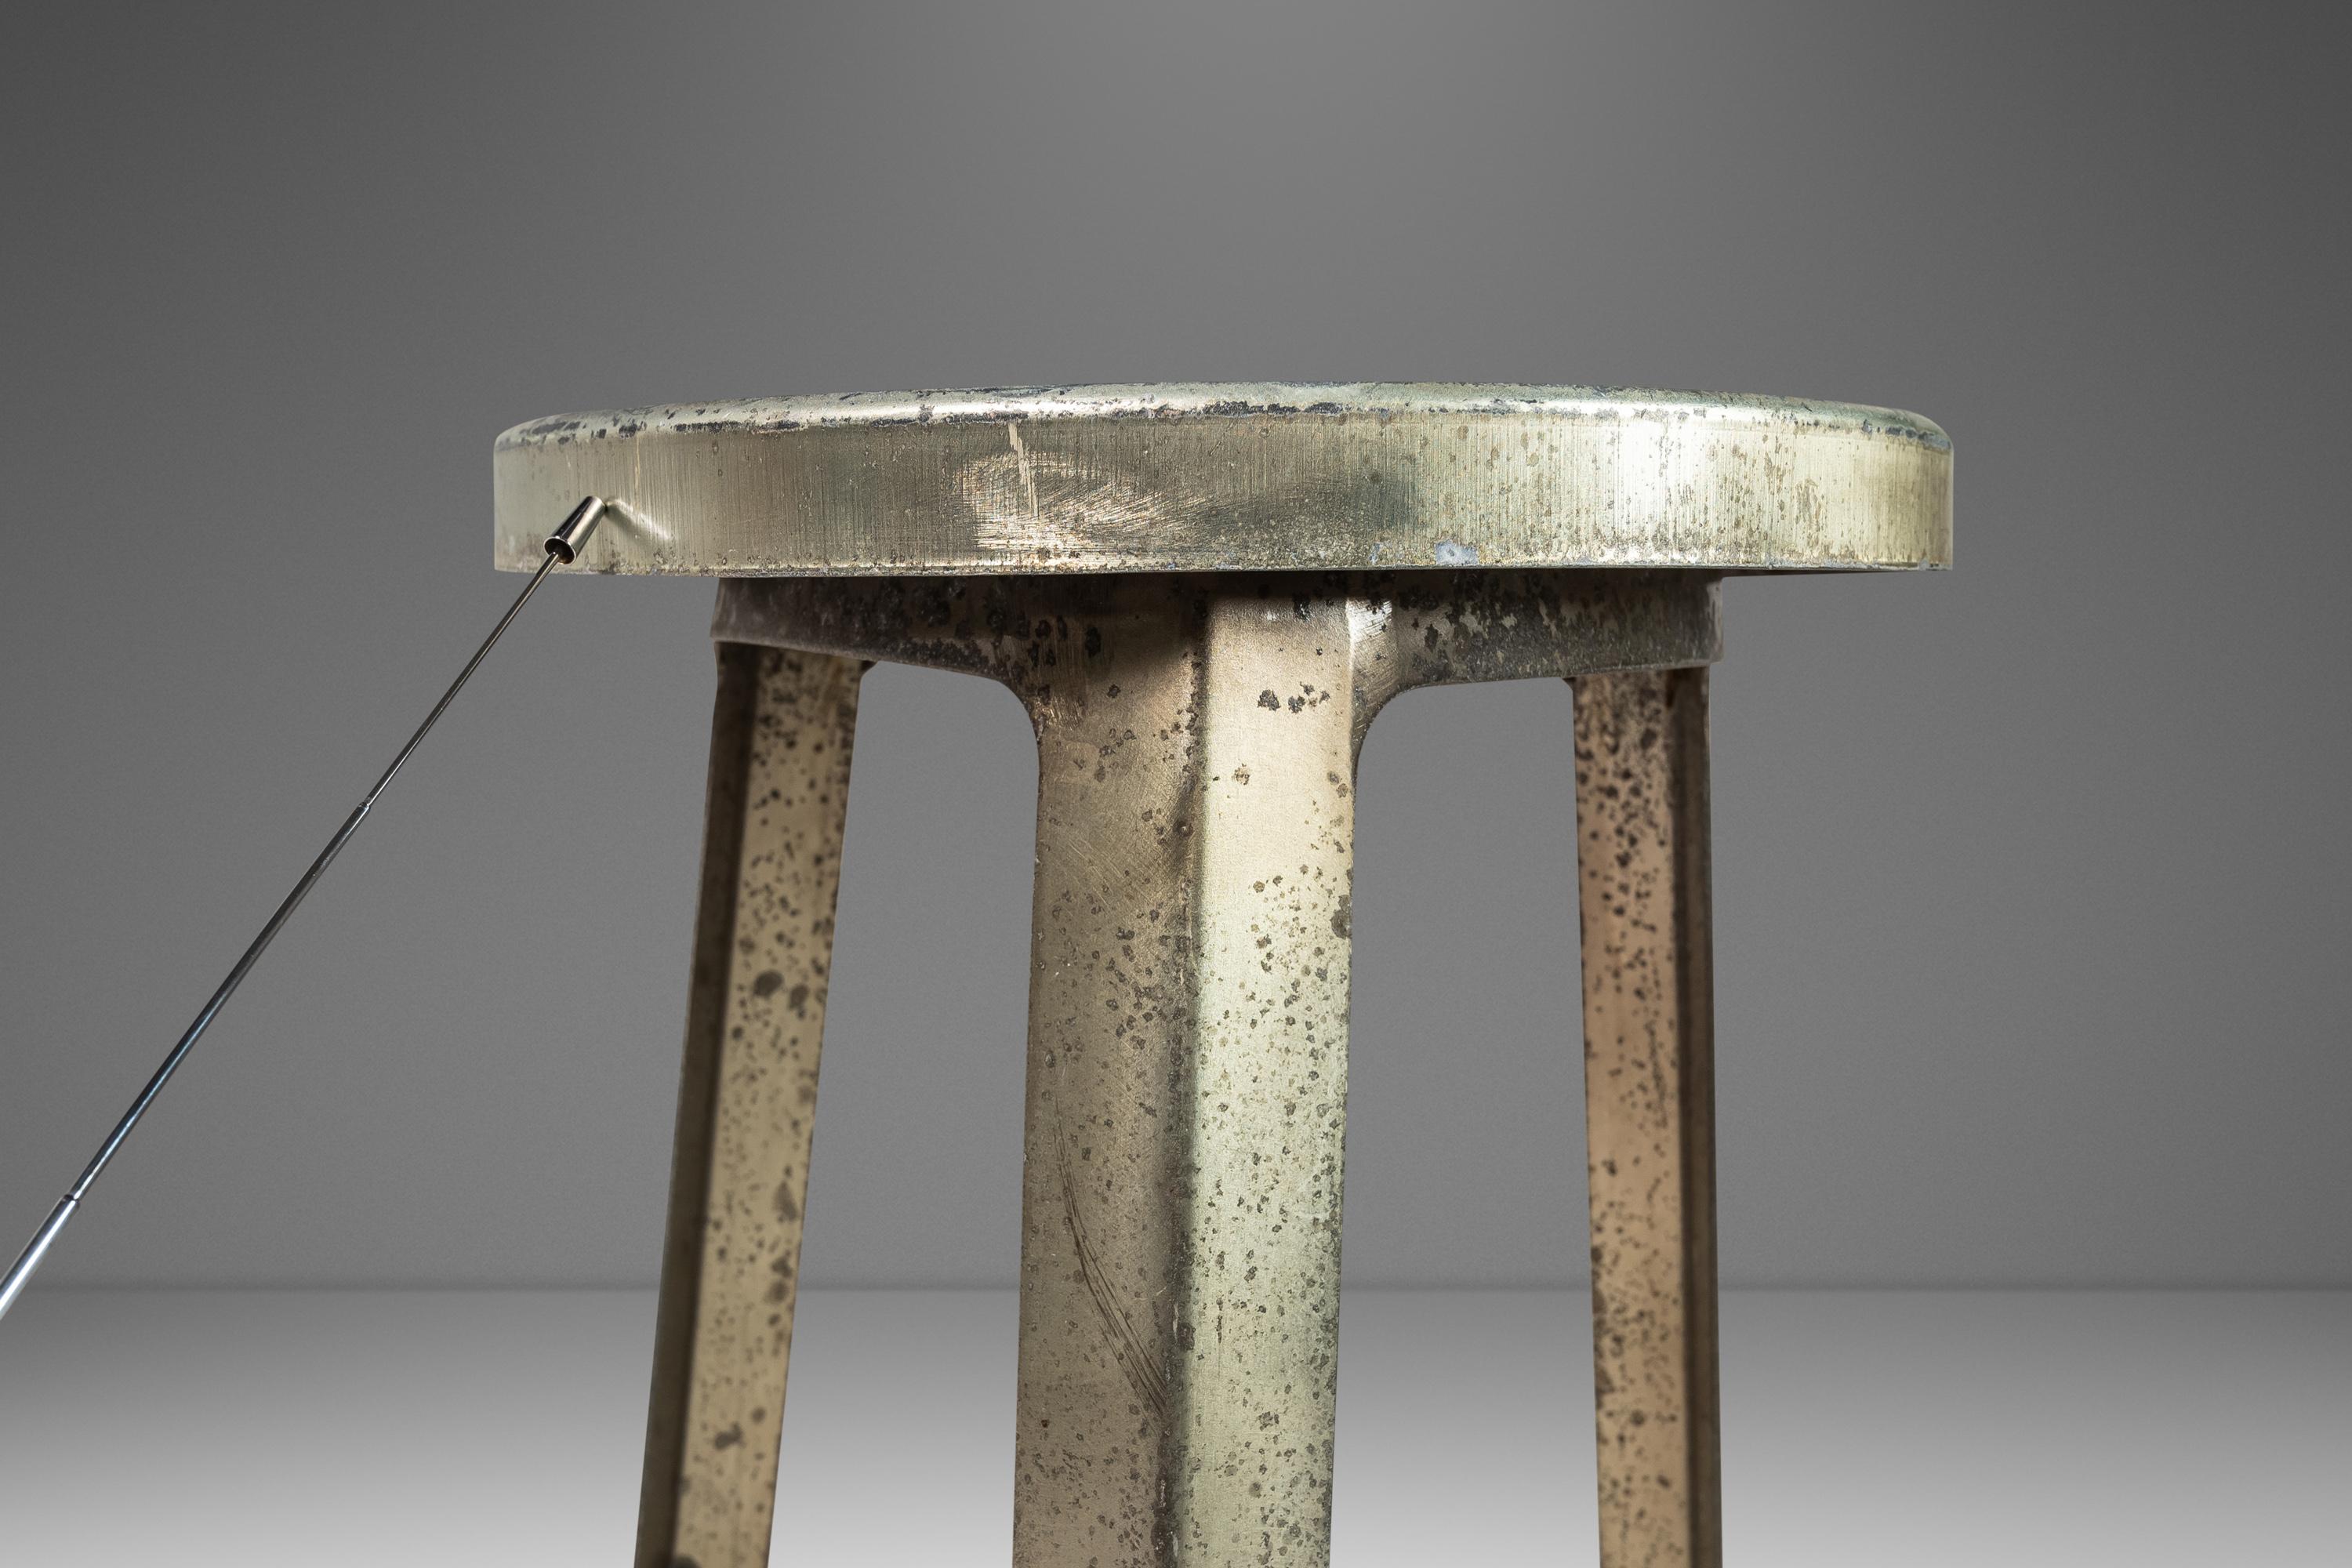 French Set of Four '4' Hammered Industrial Counter Height Bar Stools, France, C. 1950s